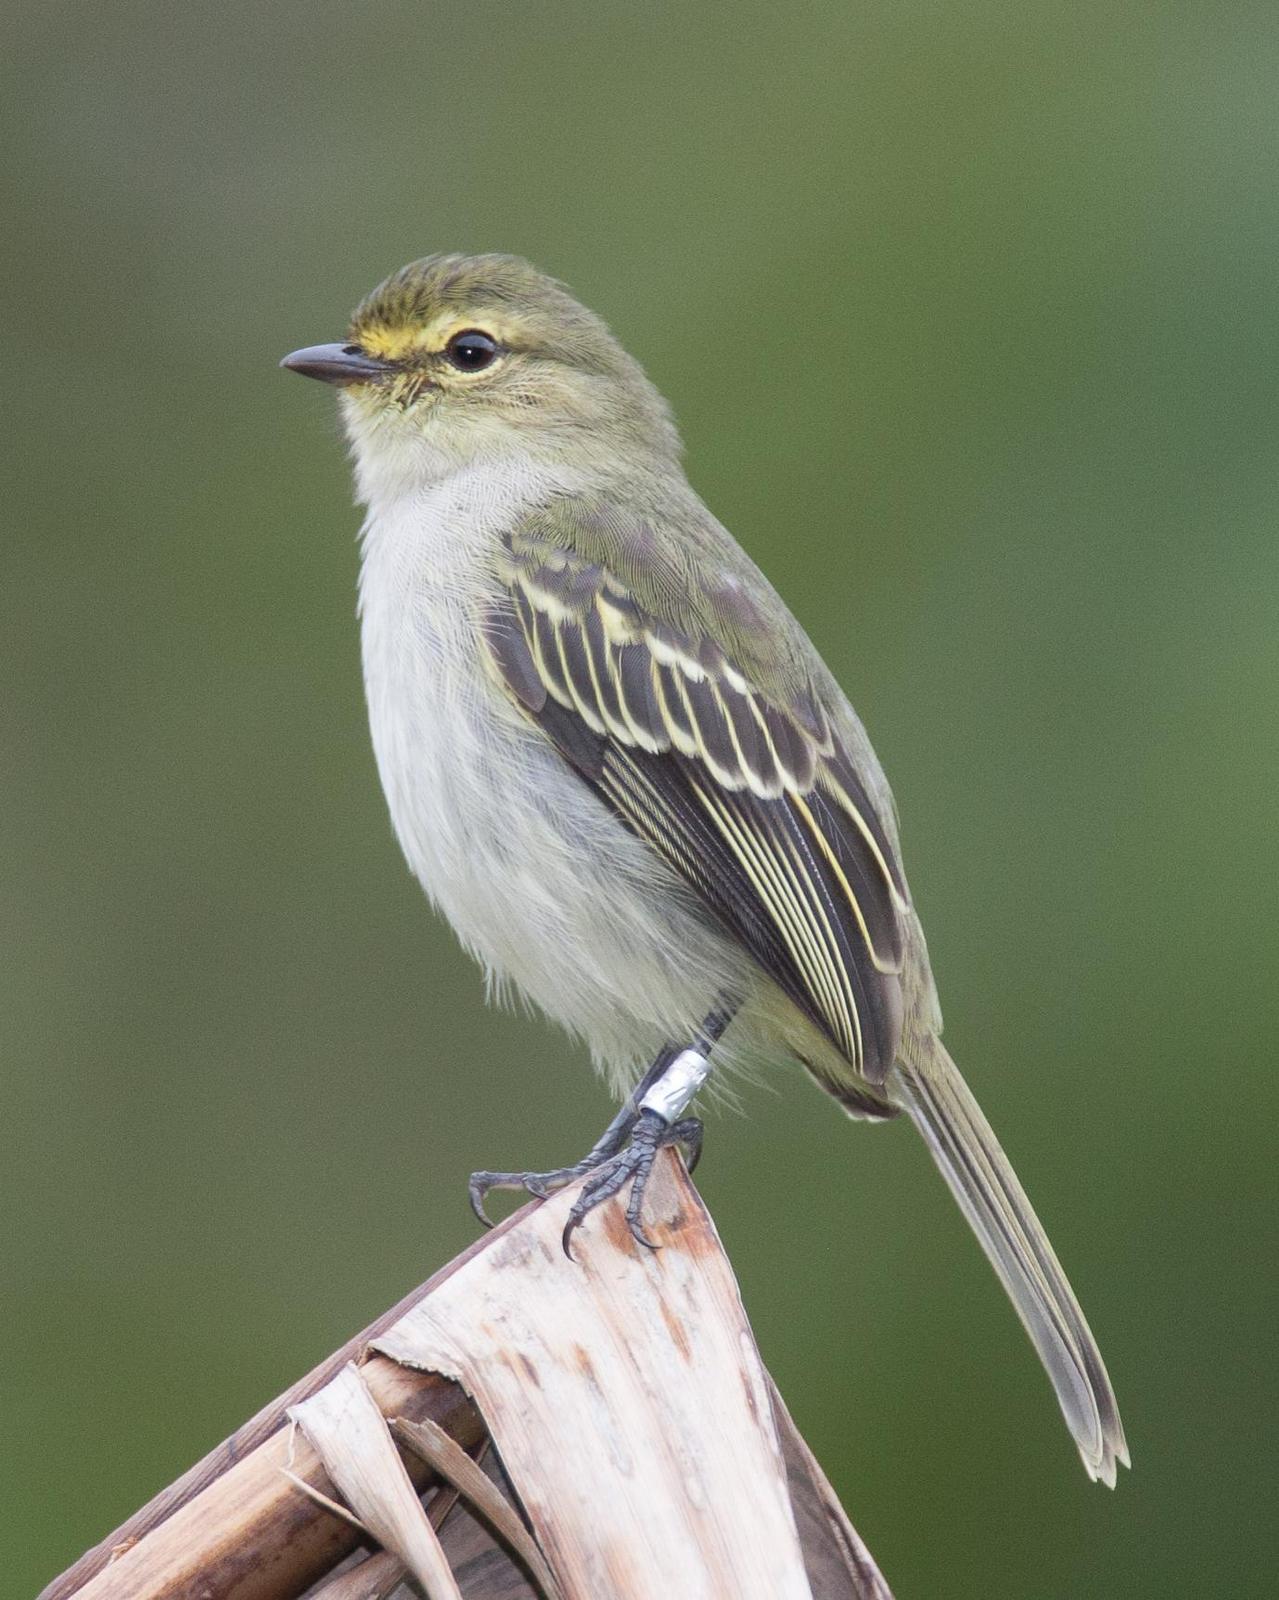 Golden-faced Tyrannulet Photo by Robert Lewis